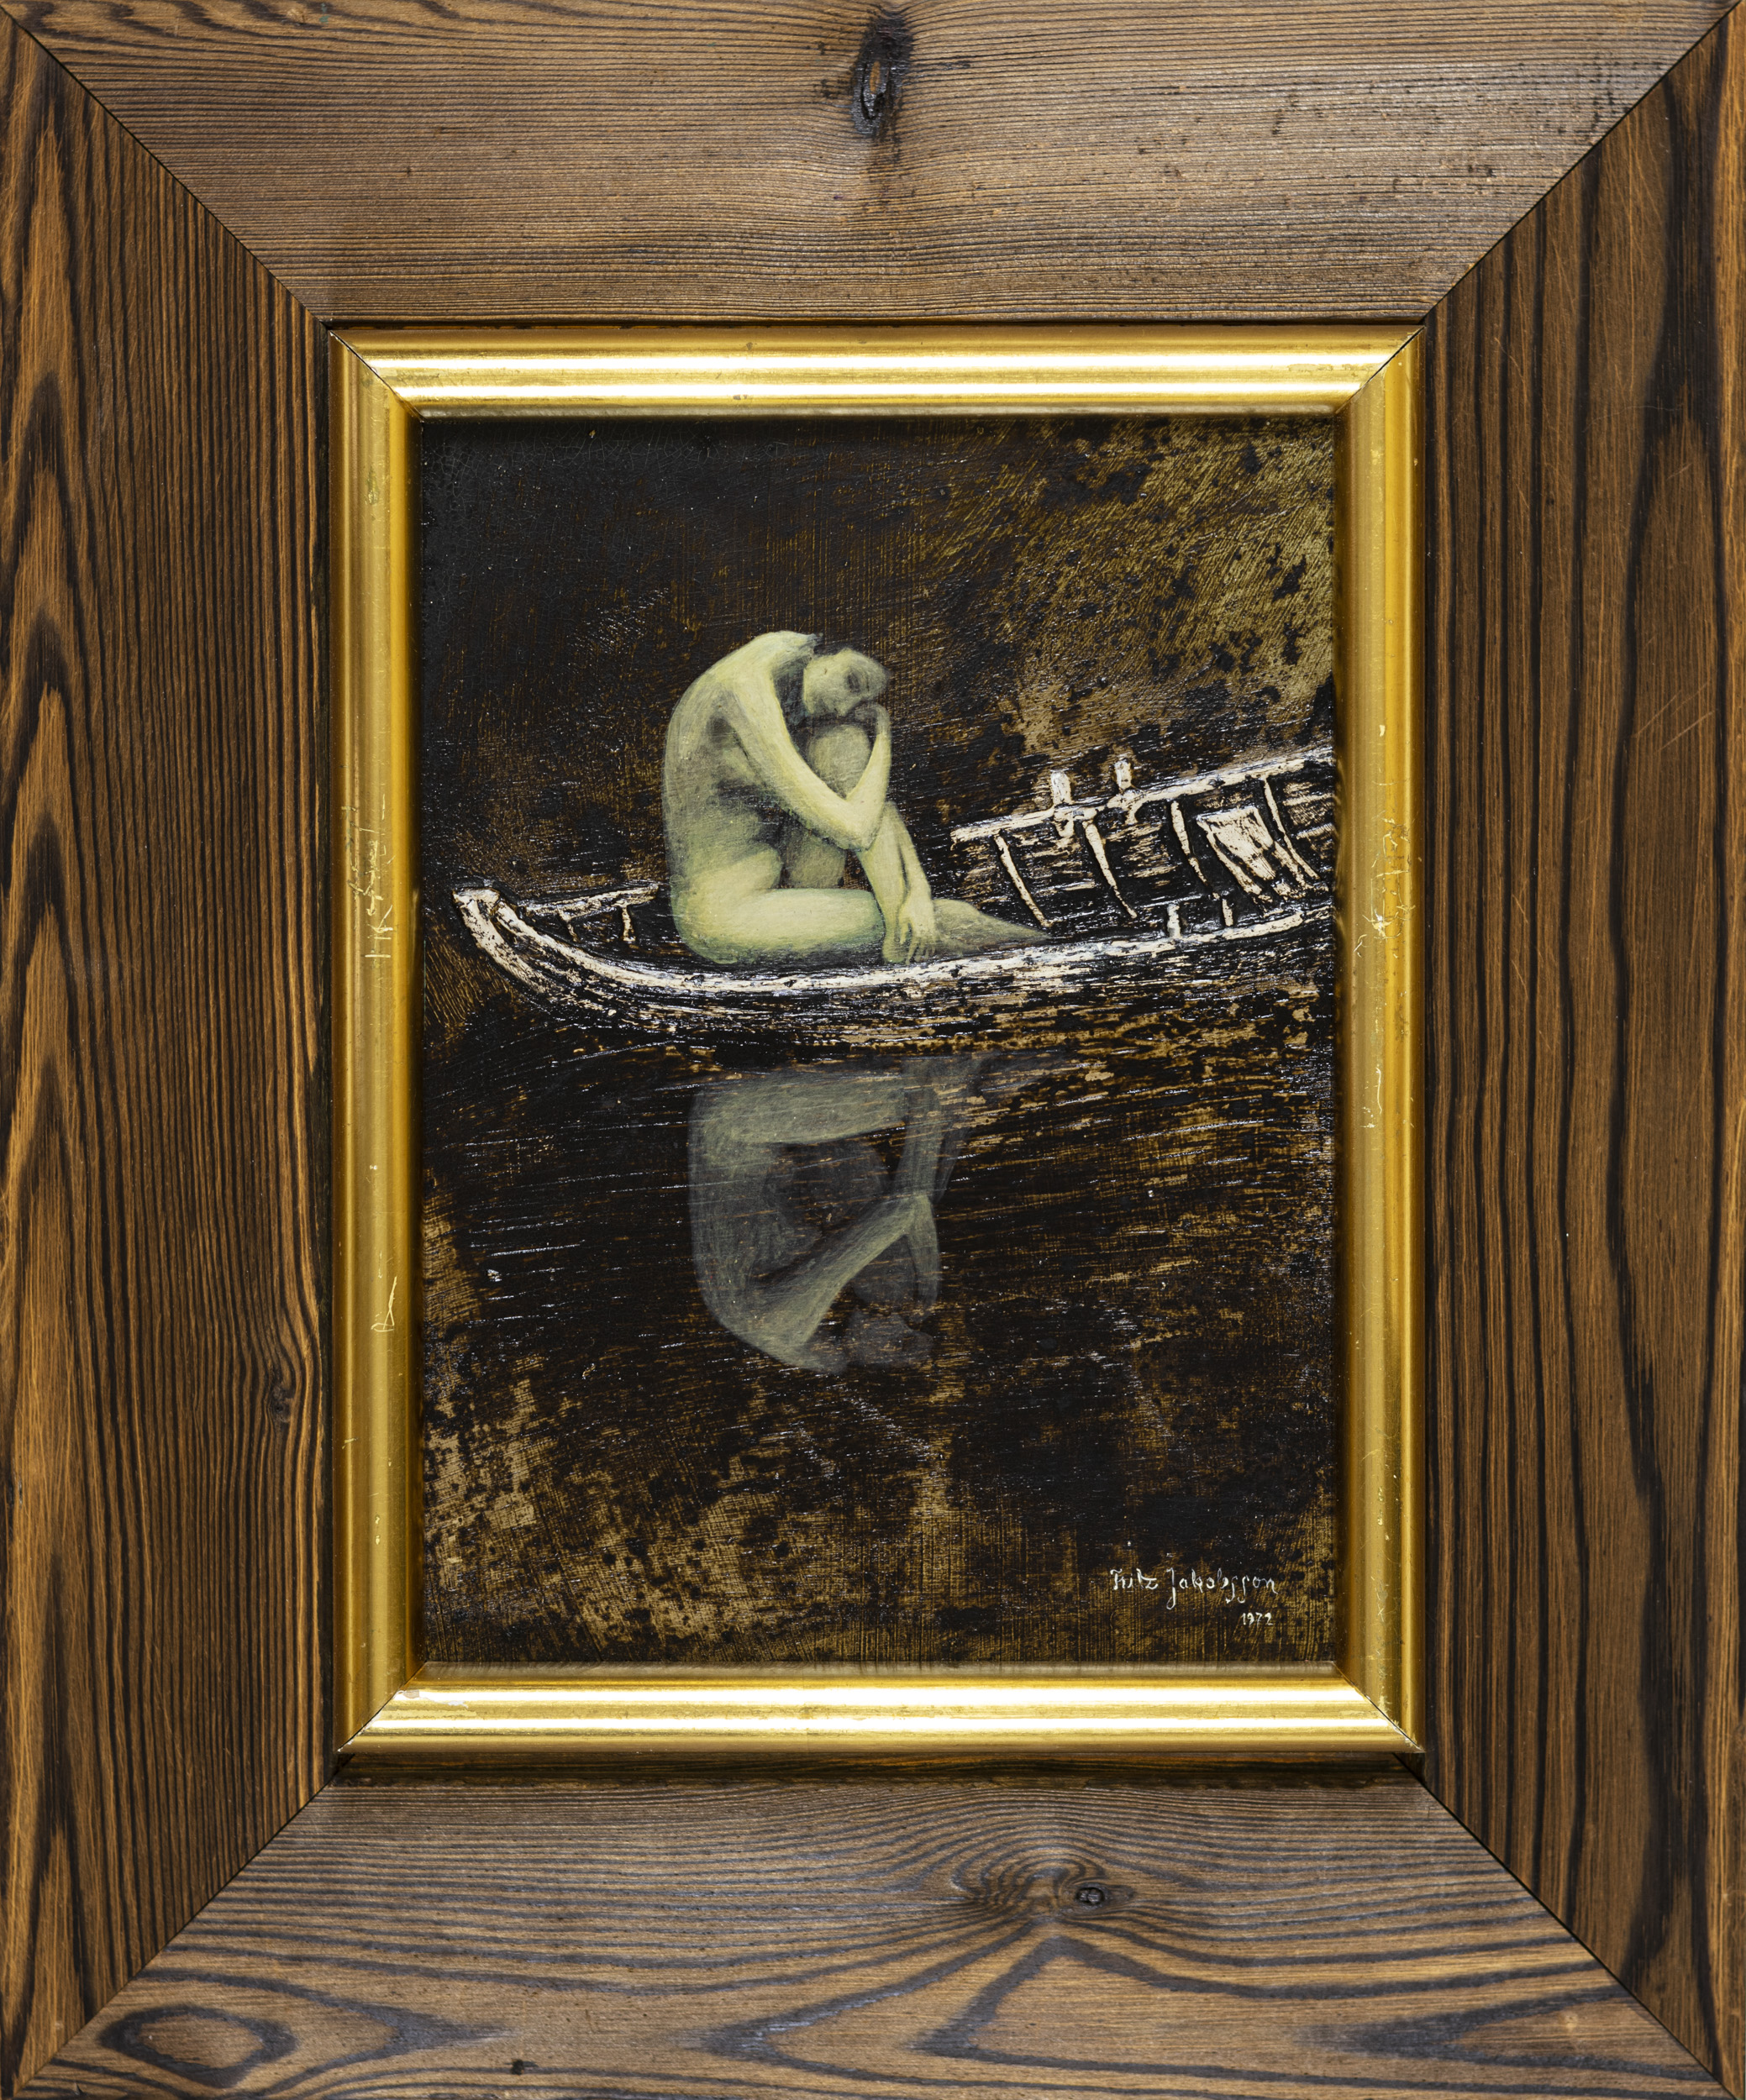 Vardus Art & Antiques - Alone in the boat